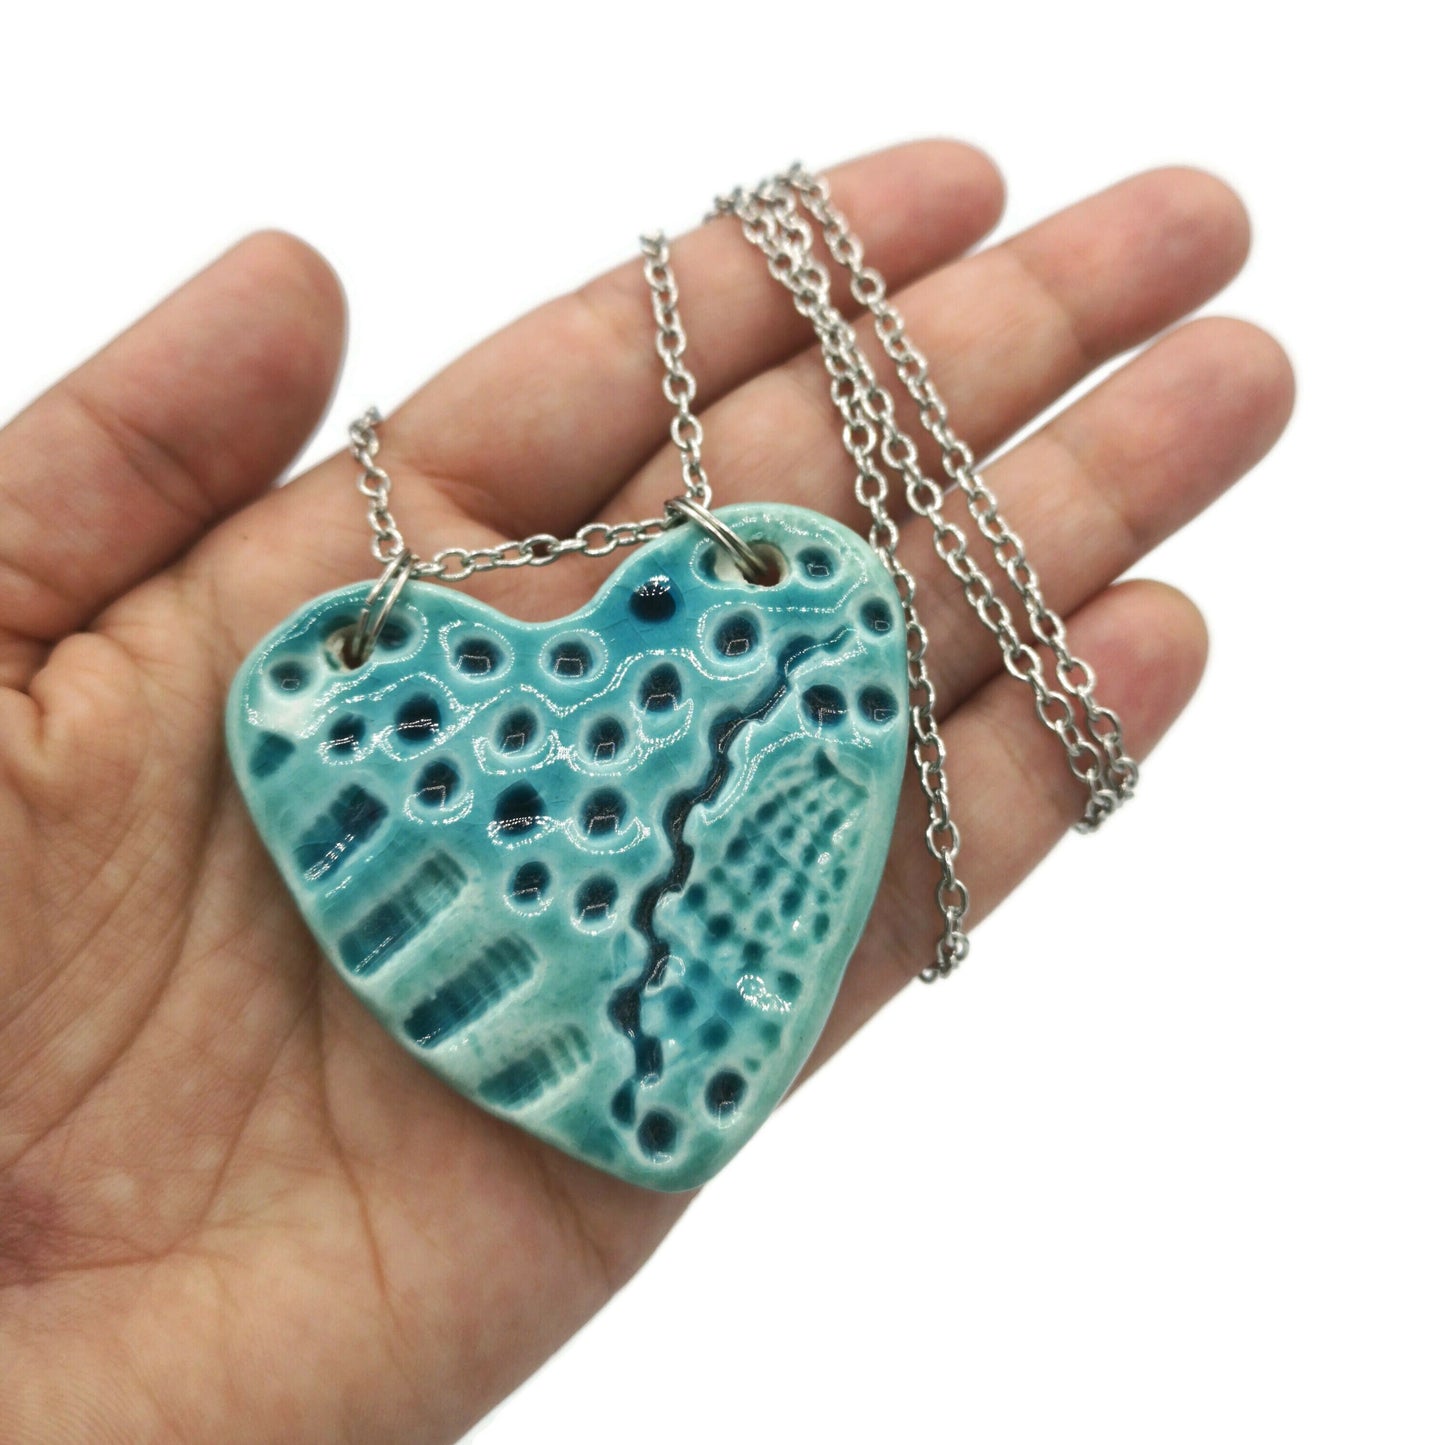 Handmade Ceramic Blue Heart Necklace Pendant For Women, Best Valentines Day Gift For Her, Boho Artisan Statement Jewelry For Wedding - Ceramica Ana Rafael